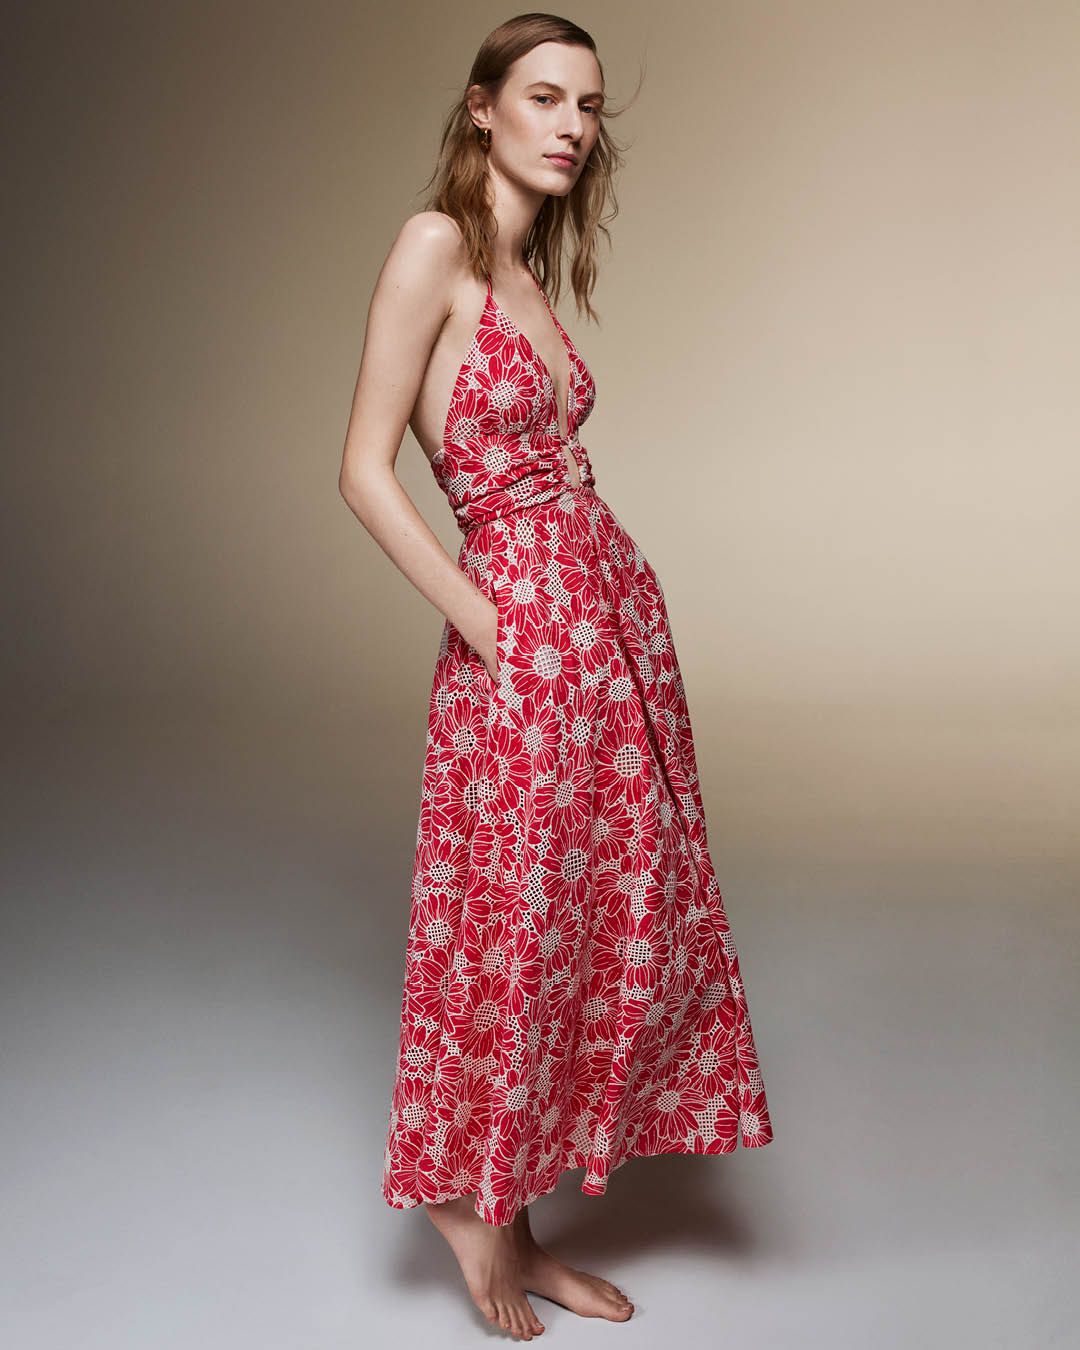 Julia Nobis standing wearing a pink floral embroidered long dress